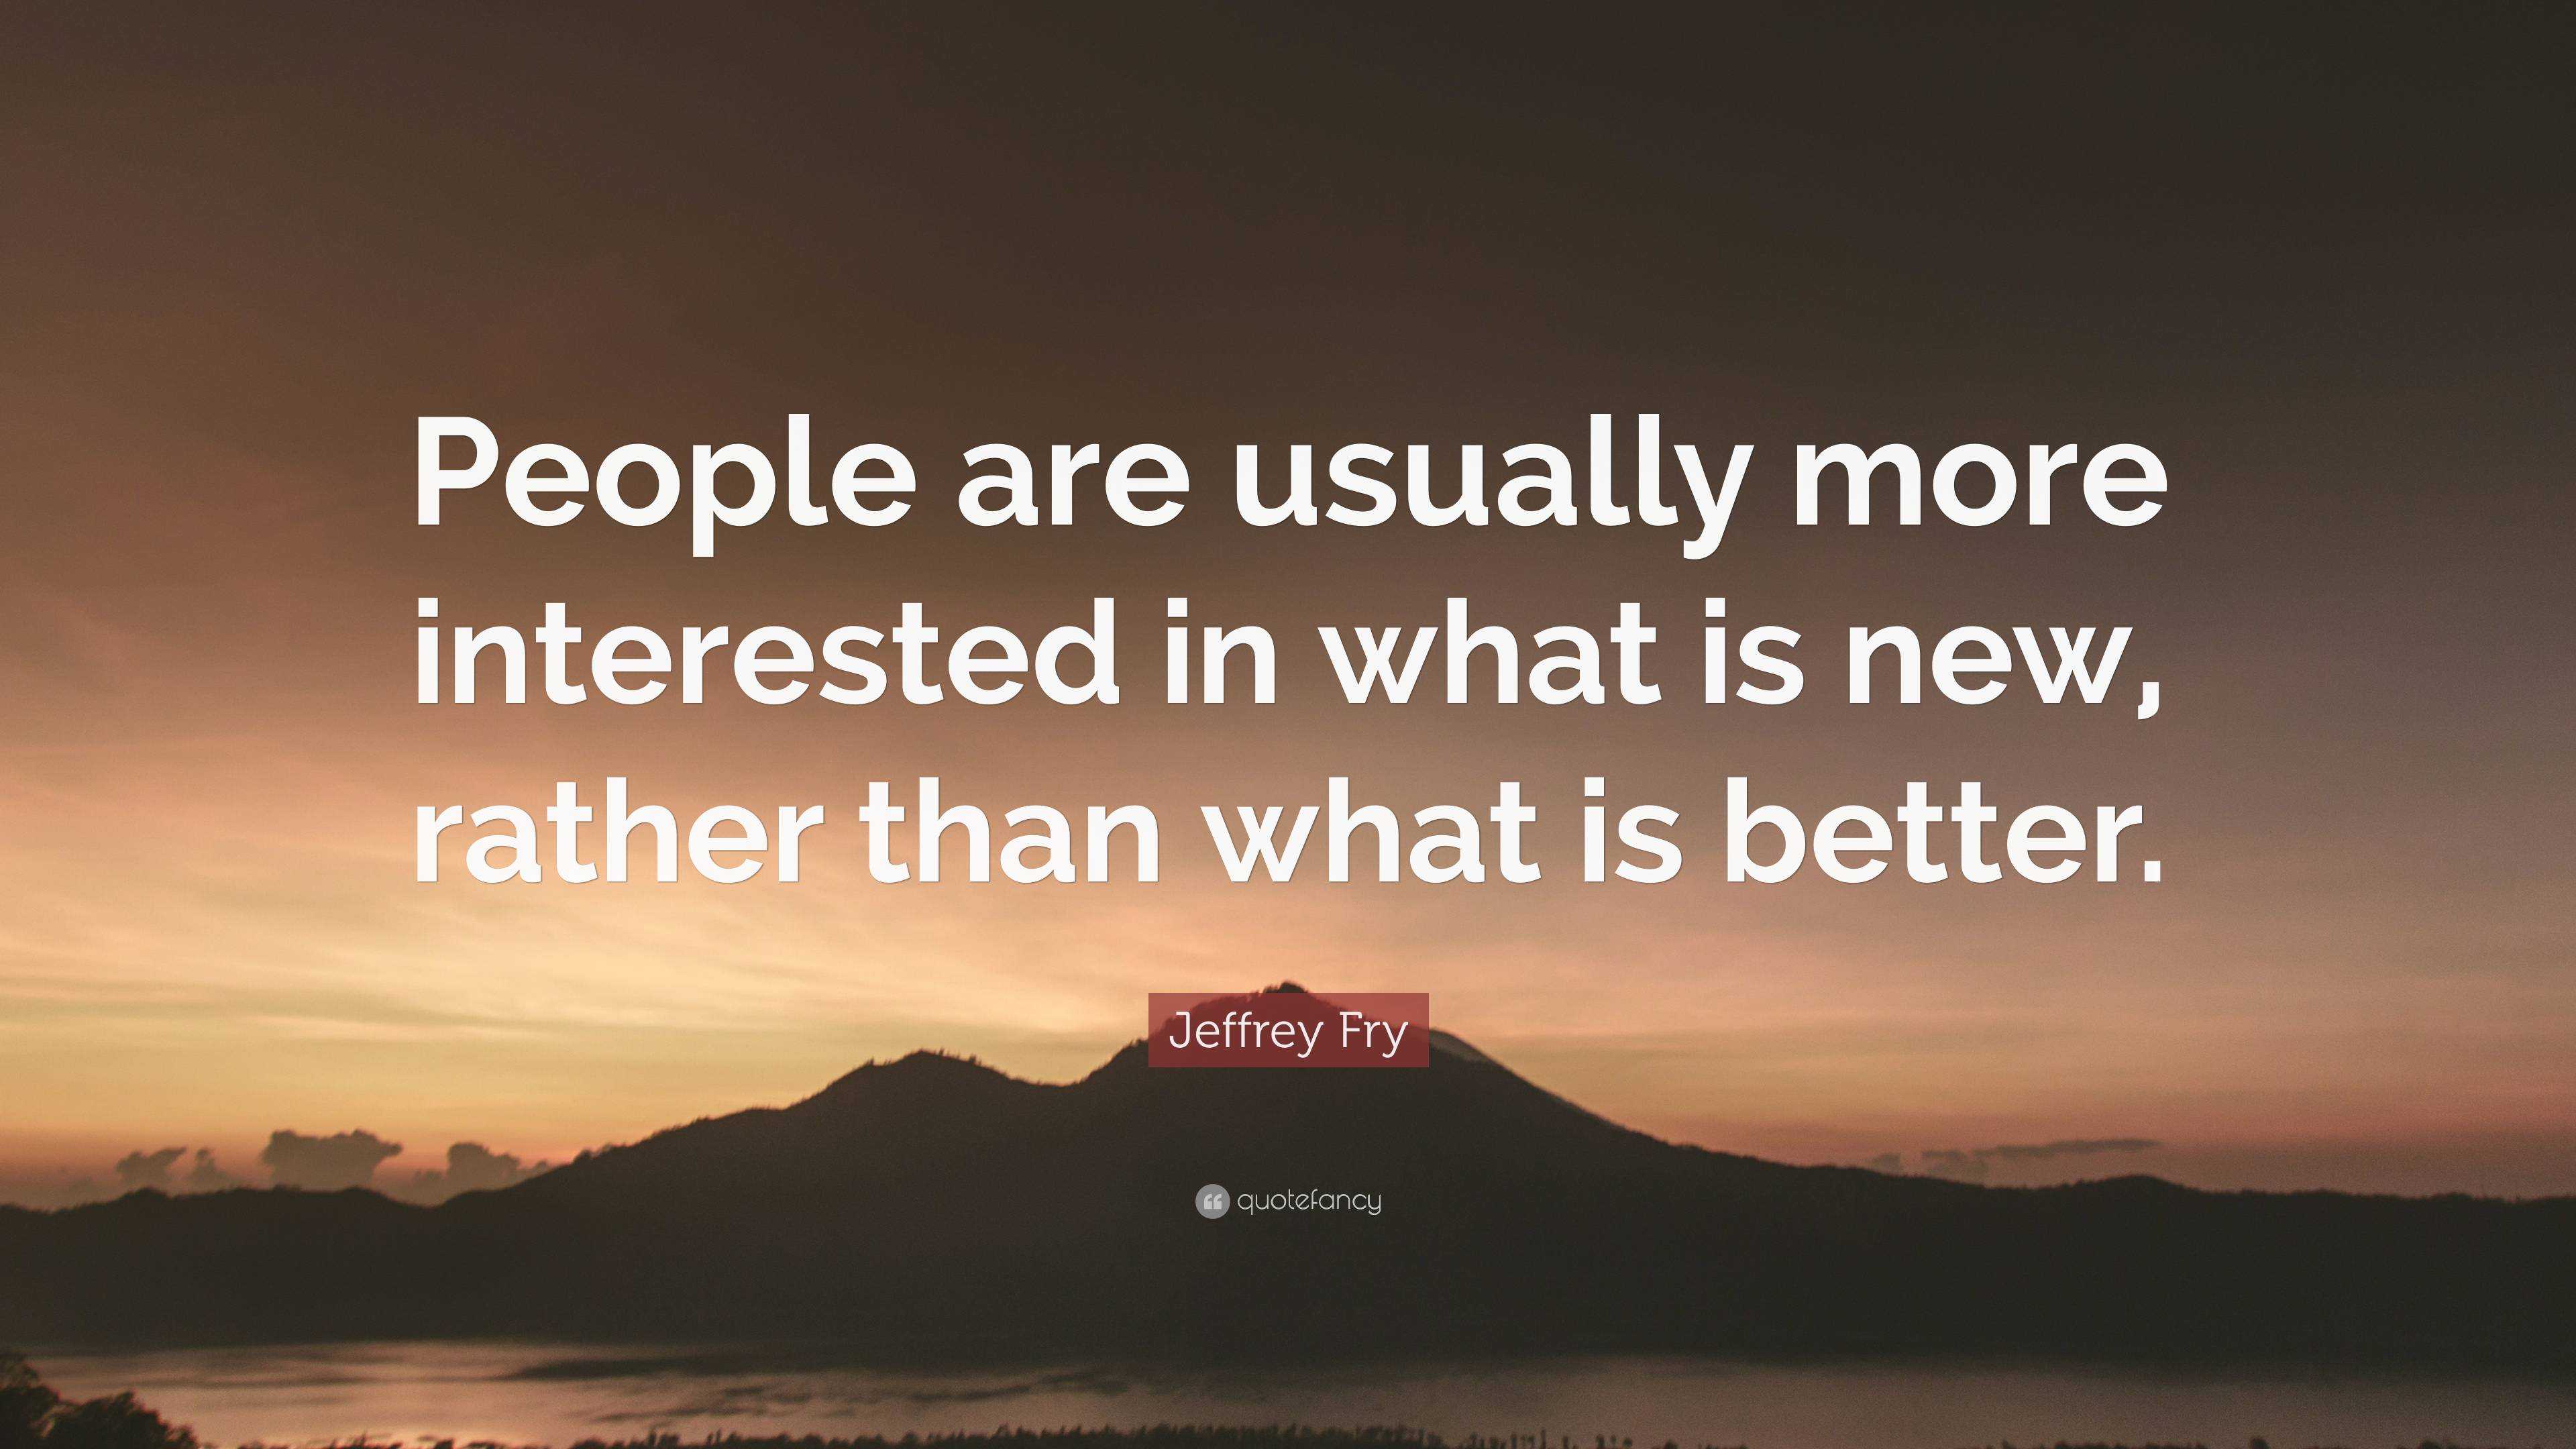 Jeffrey Fry Quote “people Are Usually More Interested In What Is New Rather Than What Is Better” 